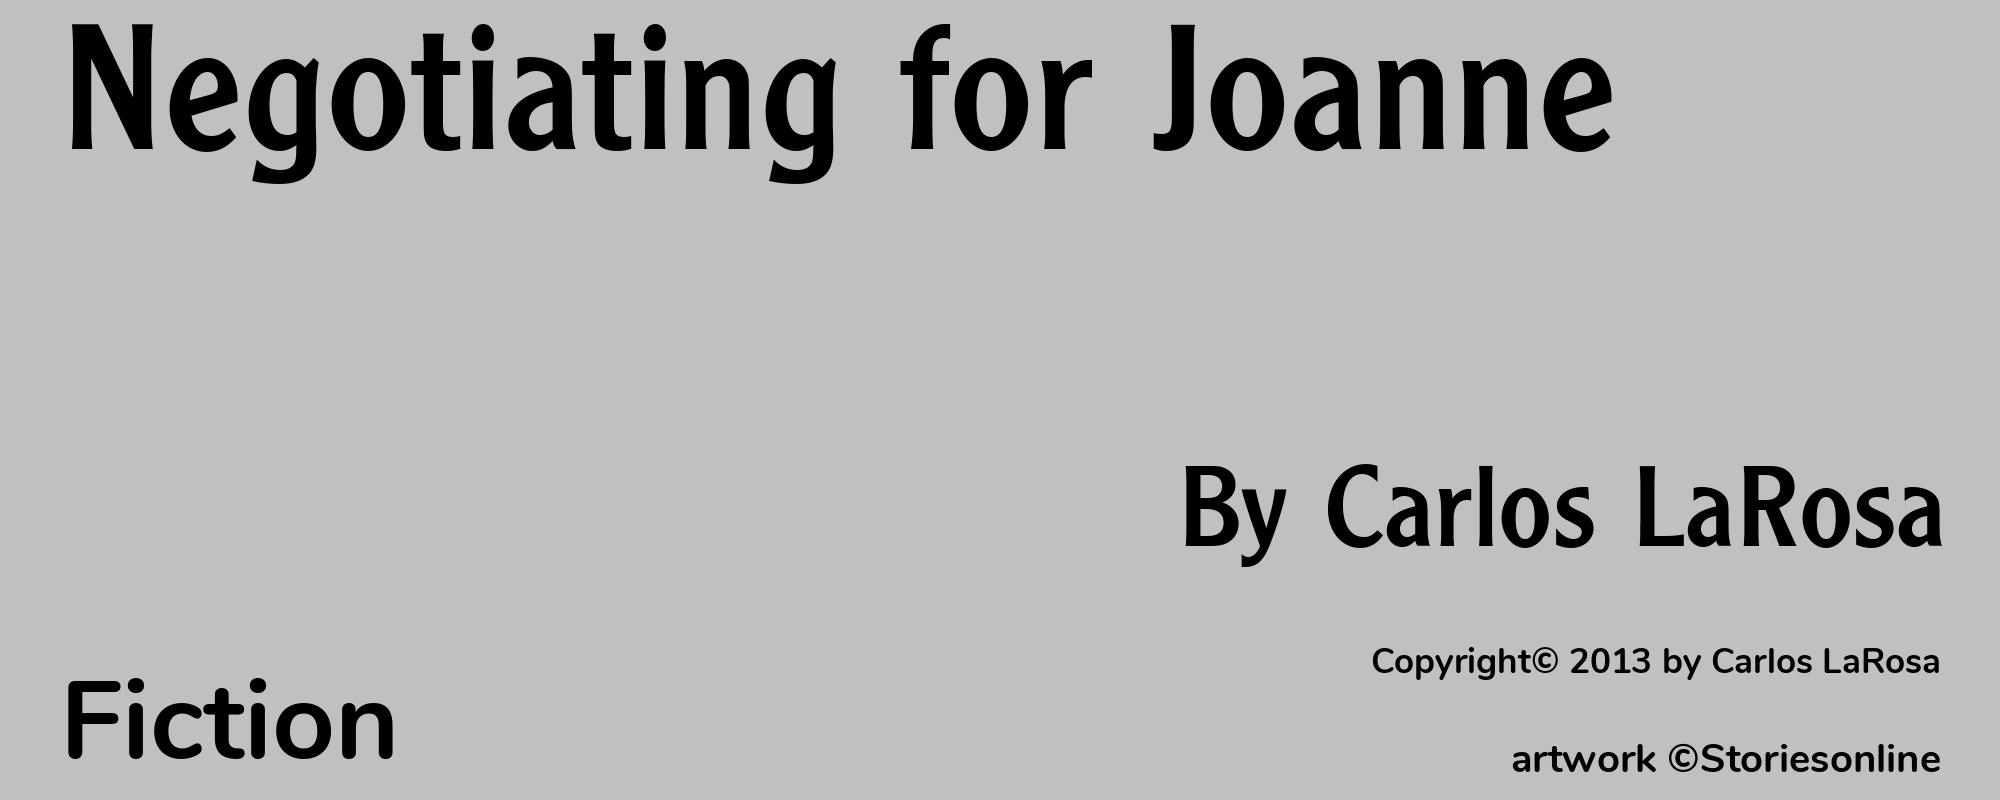 Negotiating for Joanne - Cover